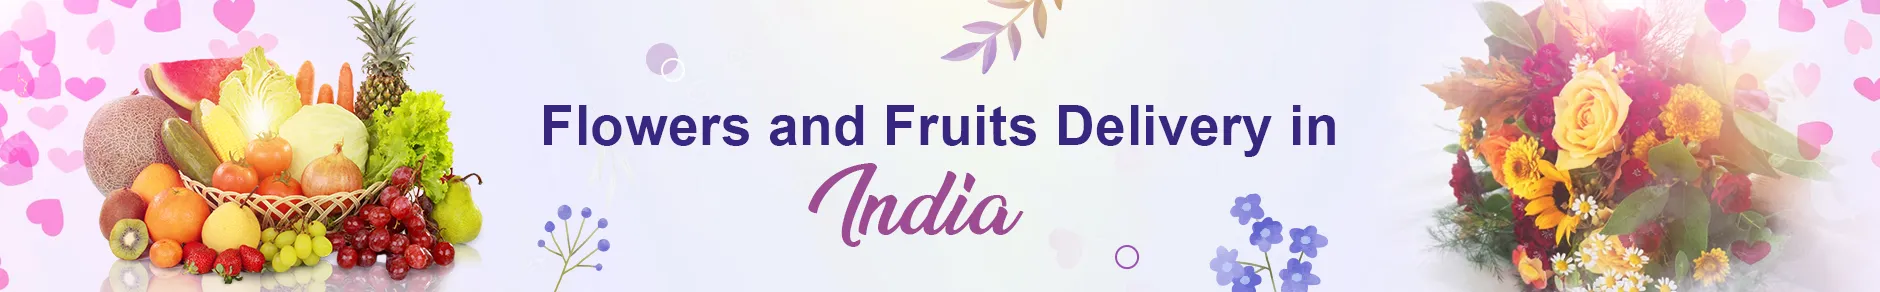 Fruits - Send Healthy Punch Of Fruits to India